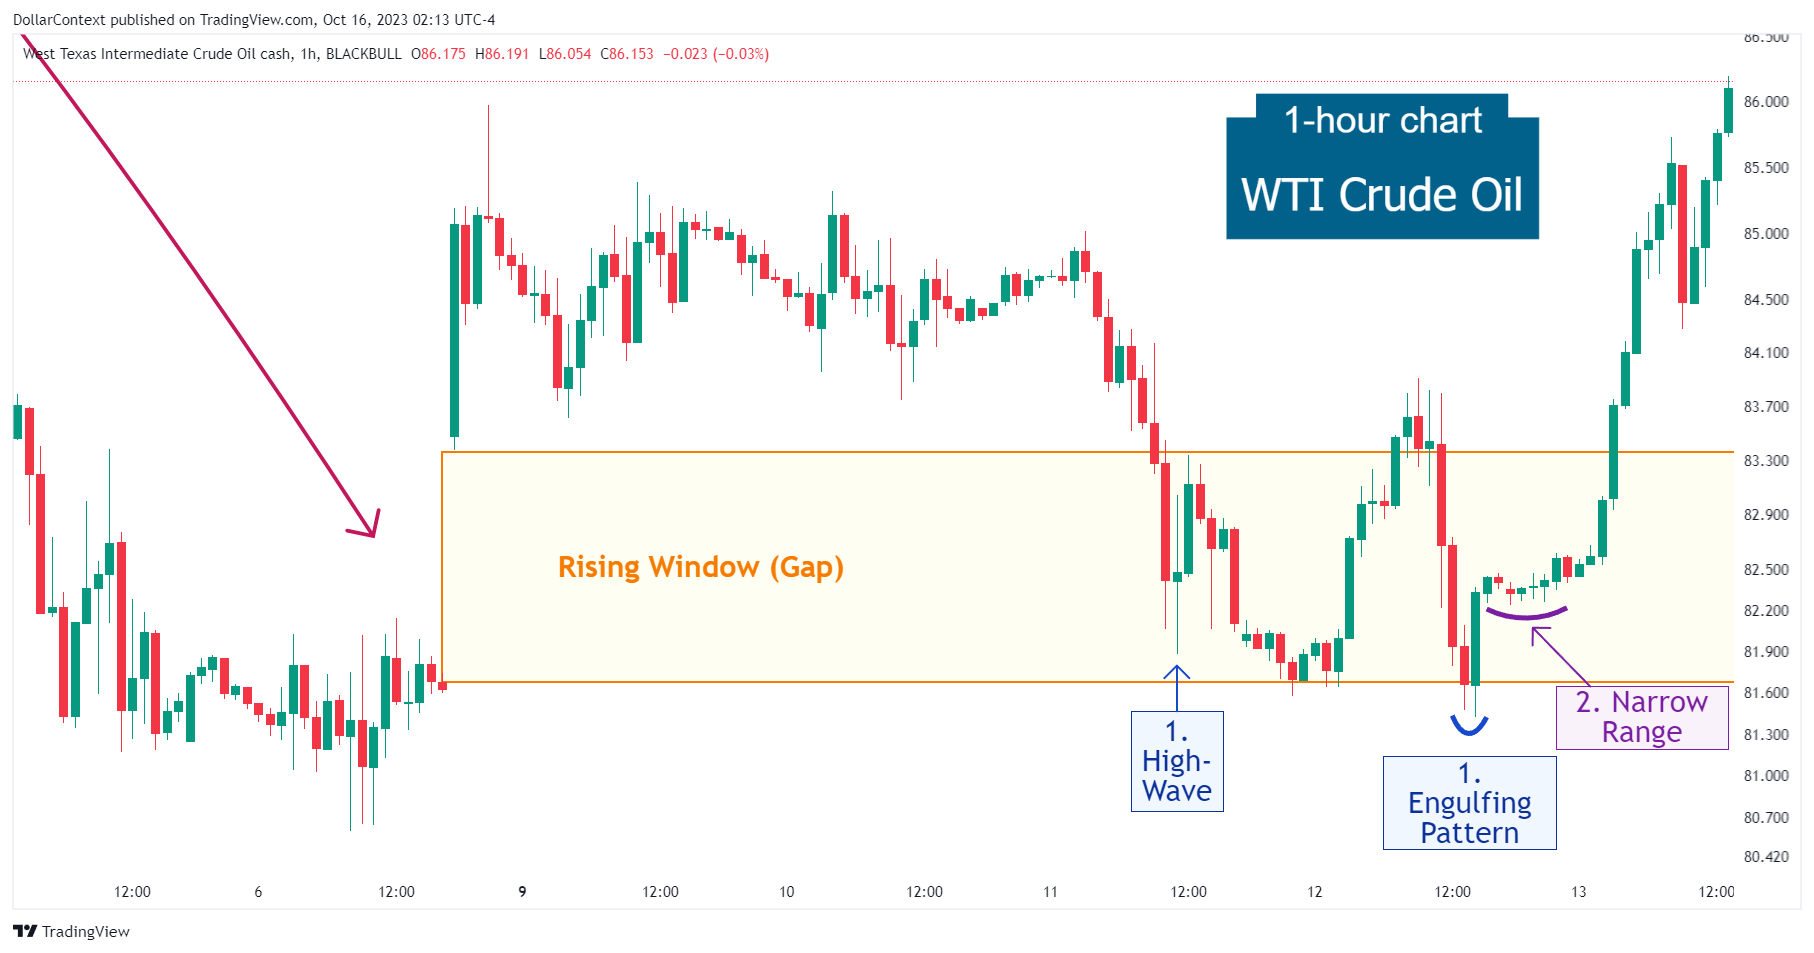 WTI Crude Oil: Early Market Transition After the Engulfing Pattern (Hourly Chart)